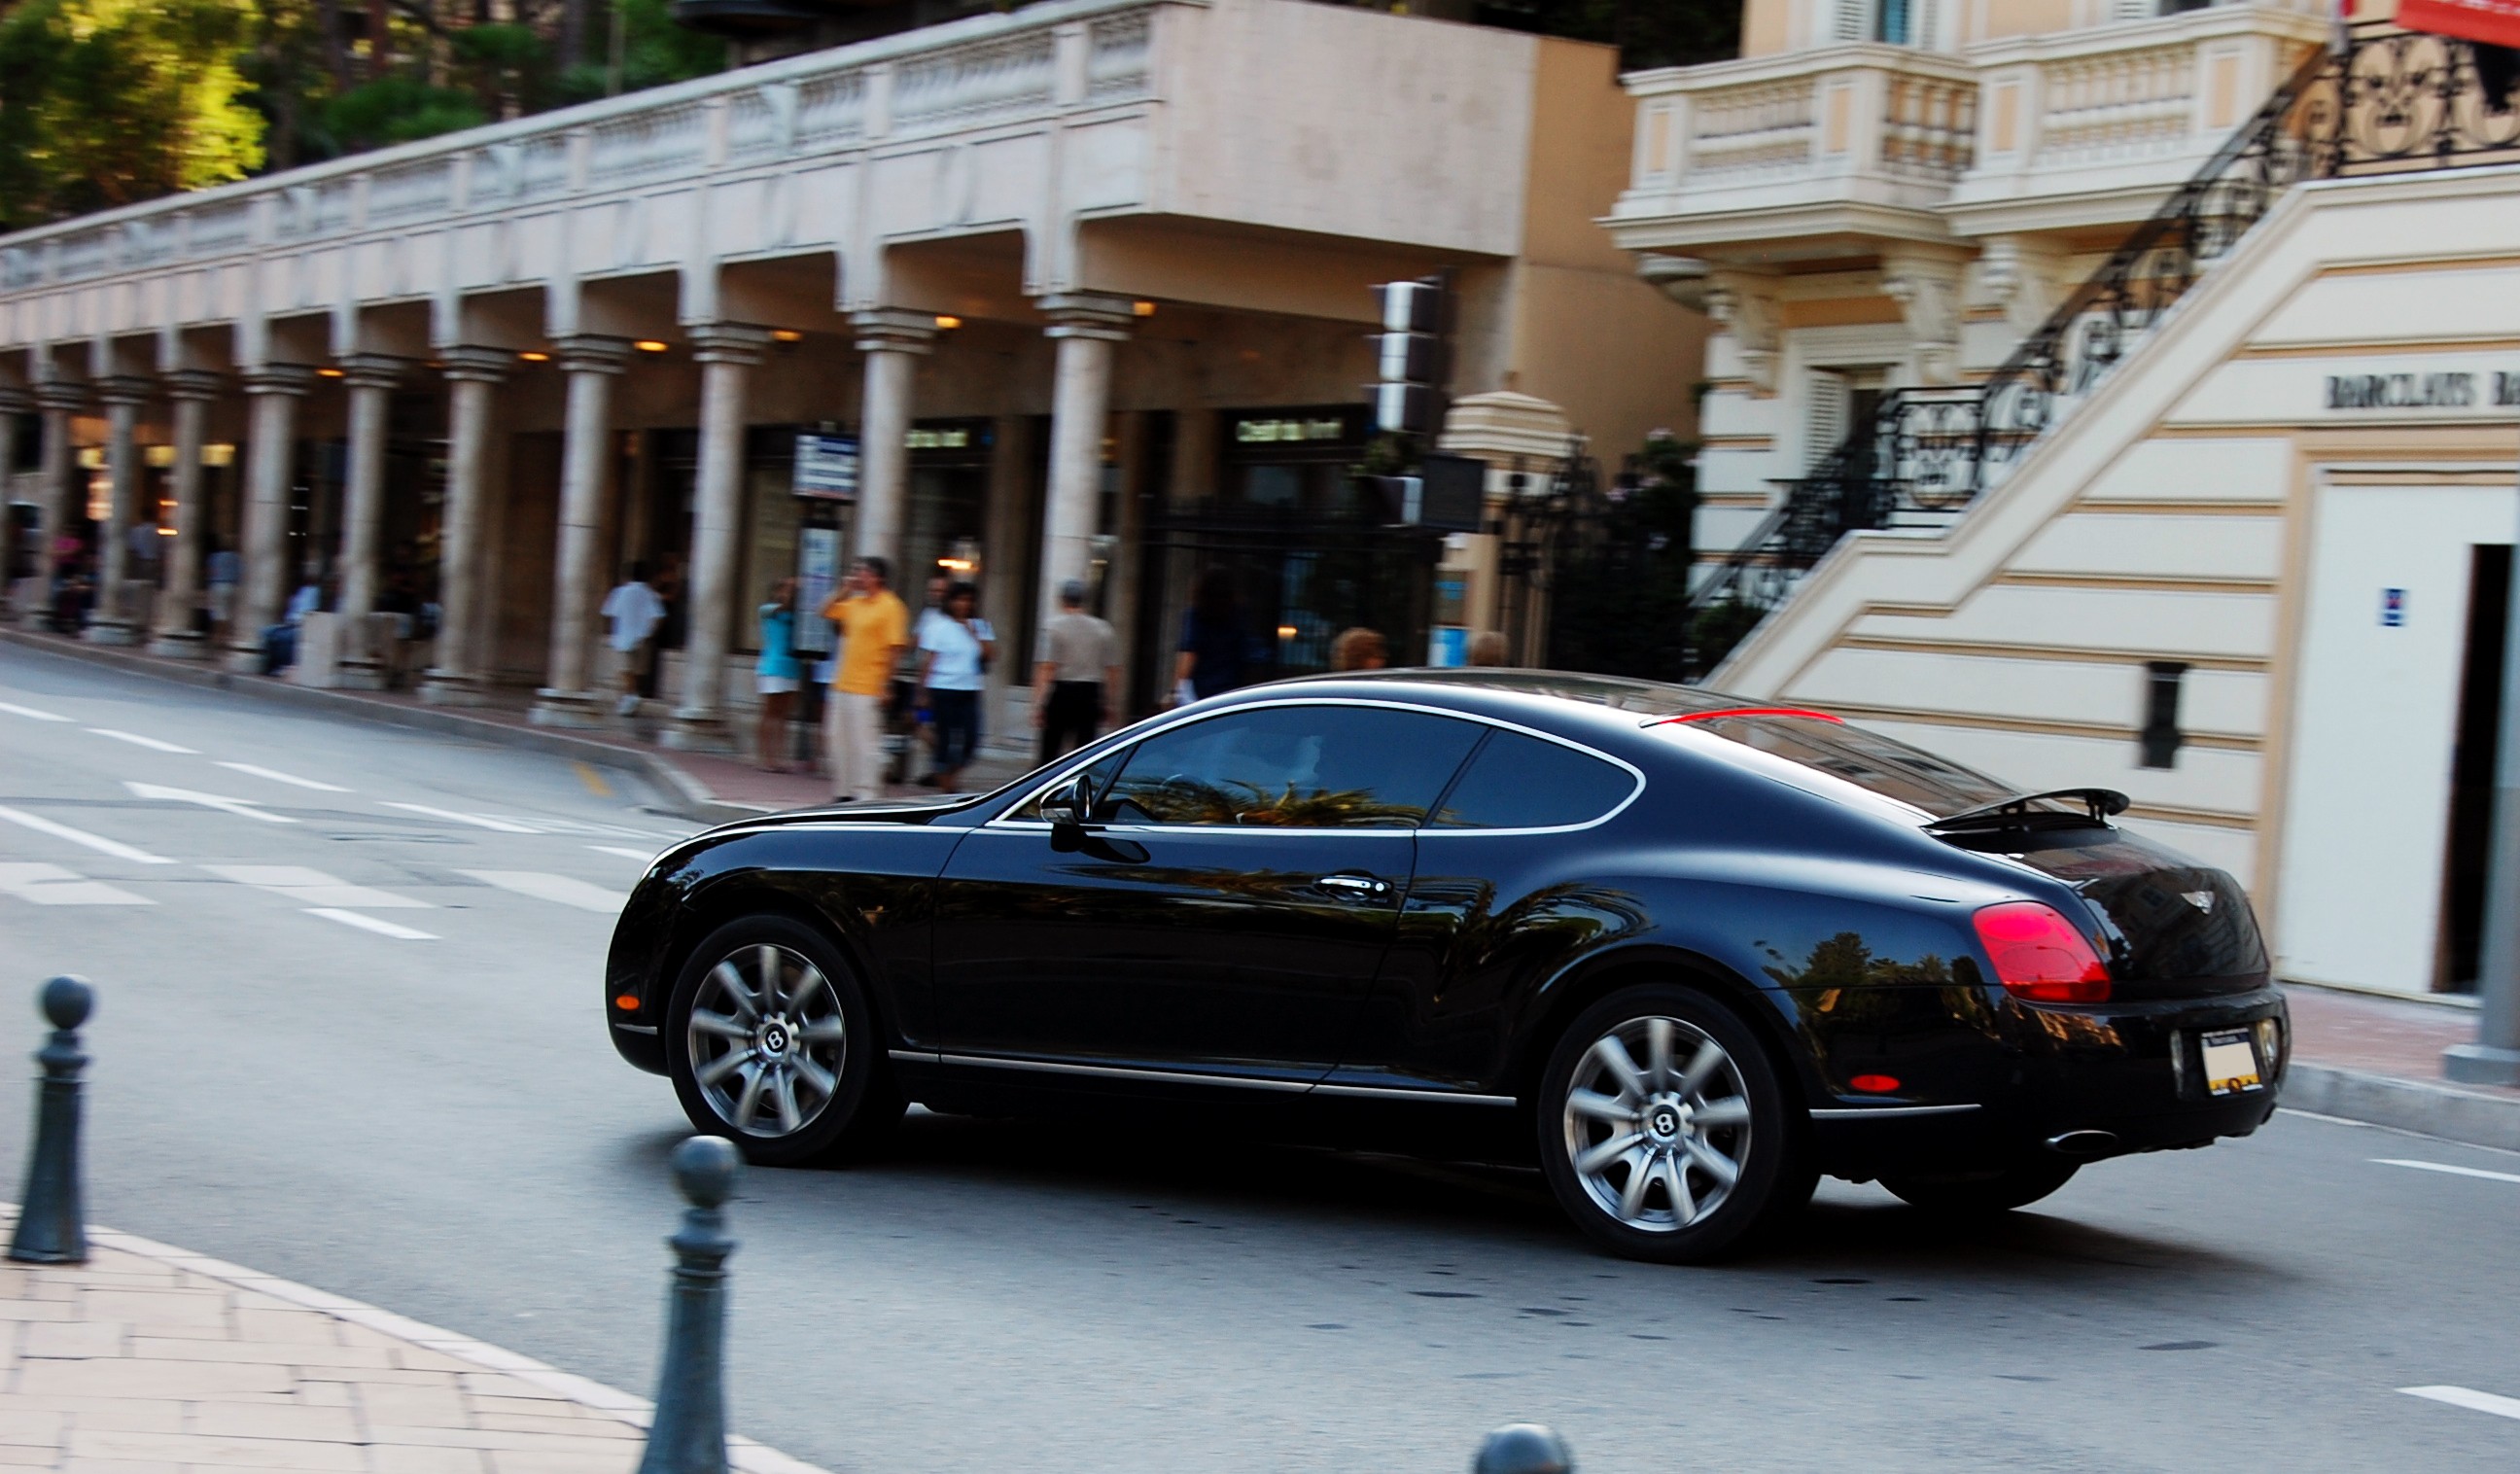 General 2592x1516 Bentley car black cars coupe luxury cars vehicle British cars Volkswagen Group Grand Tour